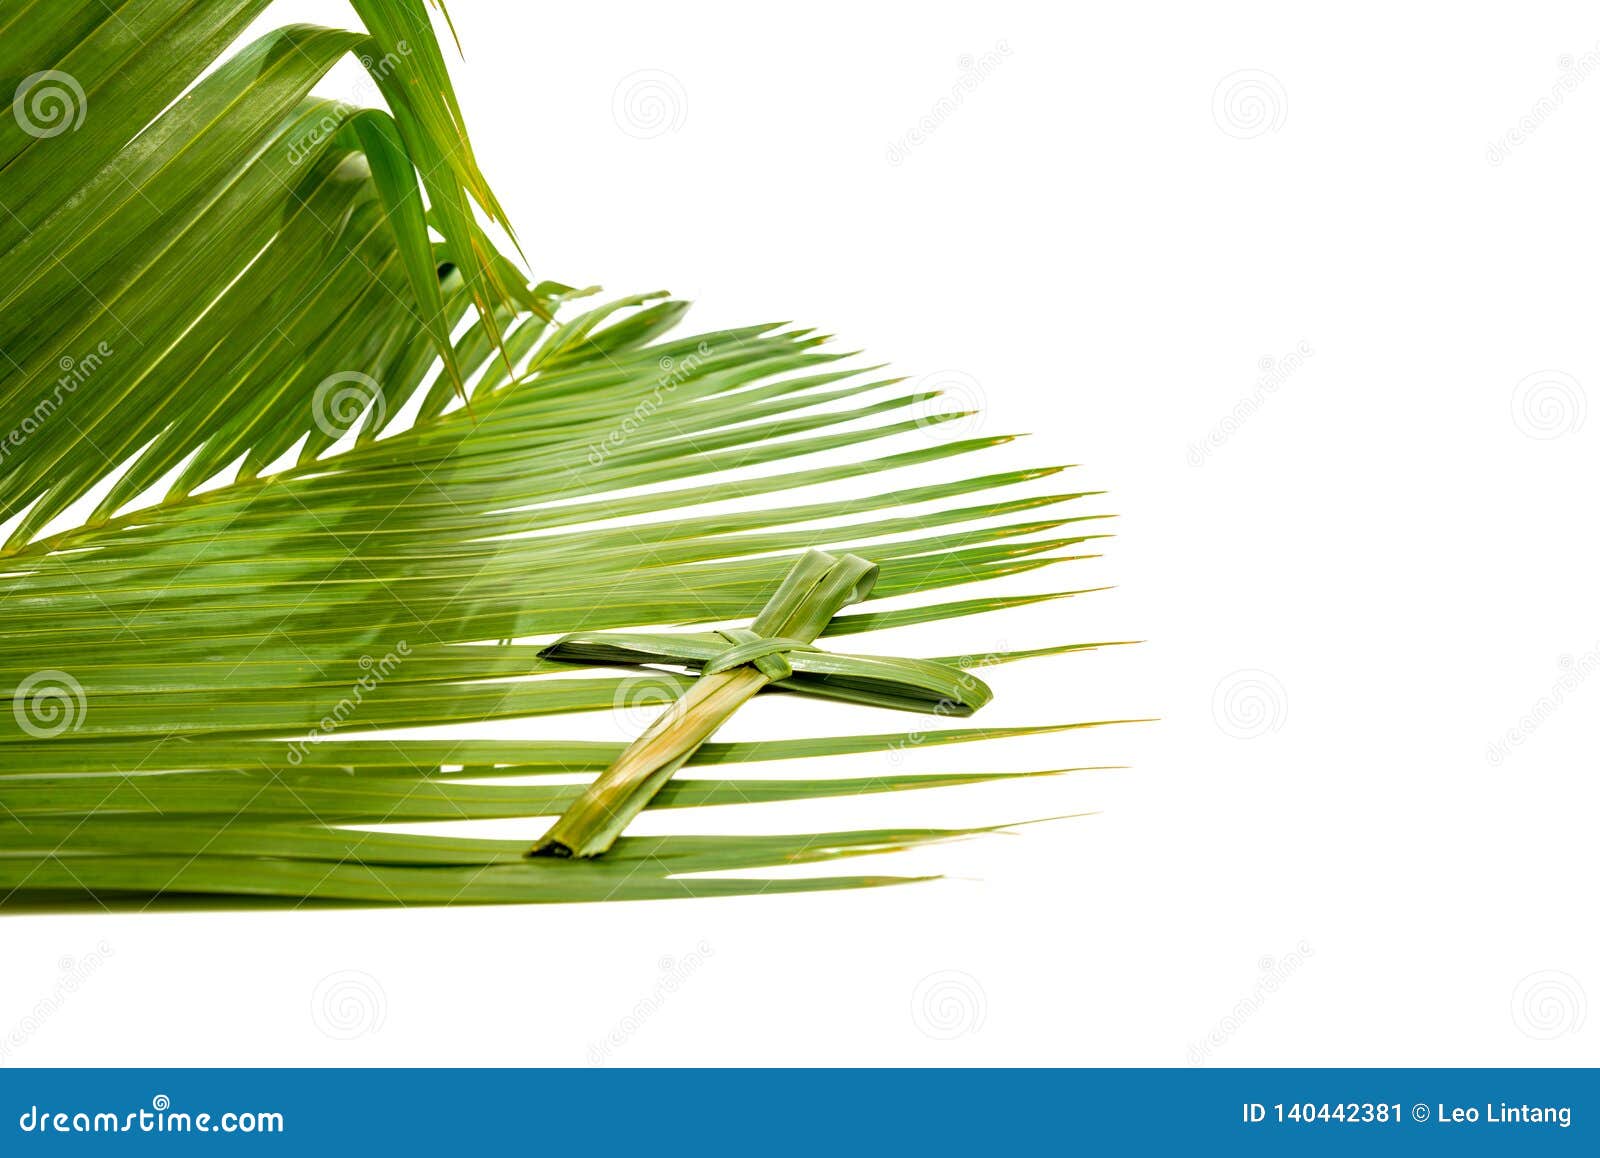 Palm Sunday Concept Stock Image Image Of Believe Bright 140442381